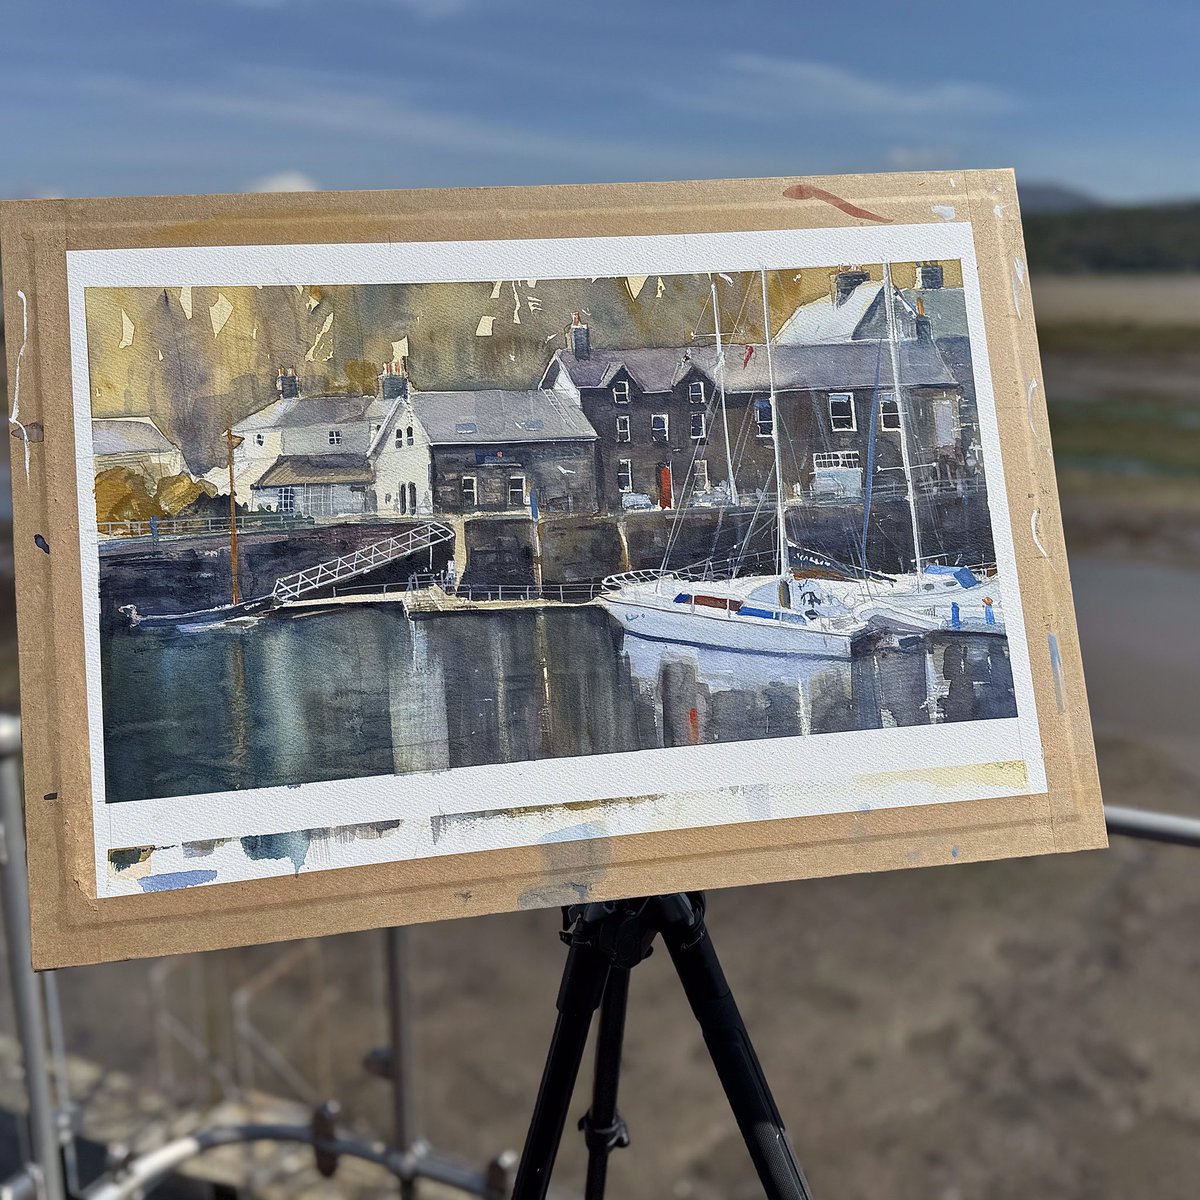 Finally finished, my watercolour, Porthmadog Yacht Club Golden Hour. Still painted on Millford paper using Schmincke watercolours. I just amended my values slightly and now done. #watercolour #porthmadog #marineart #paintings